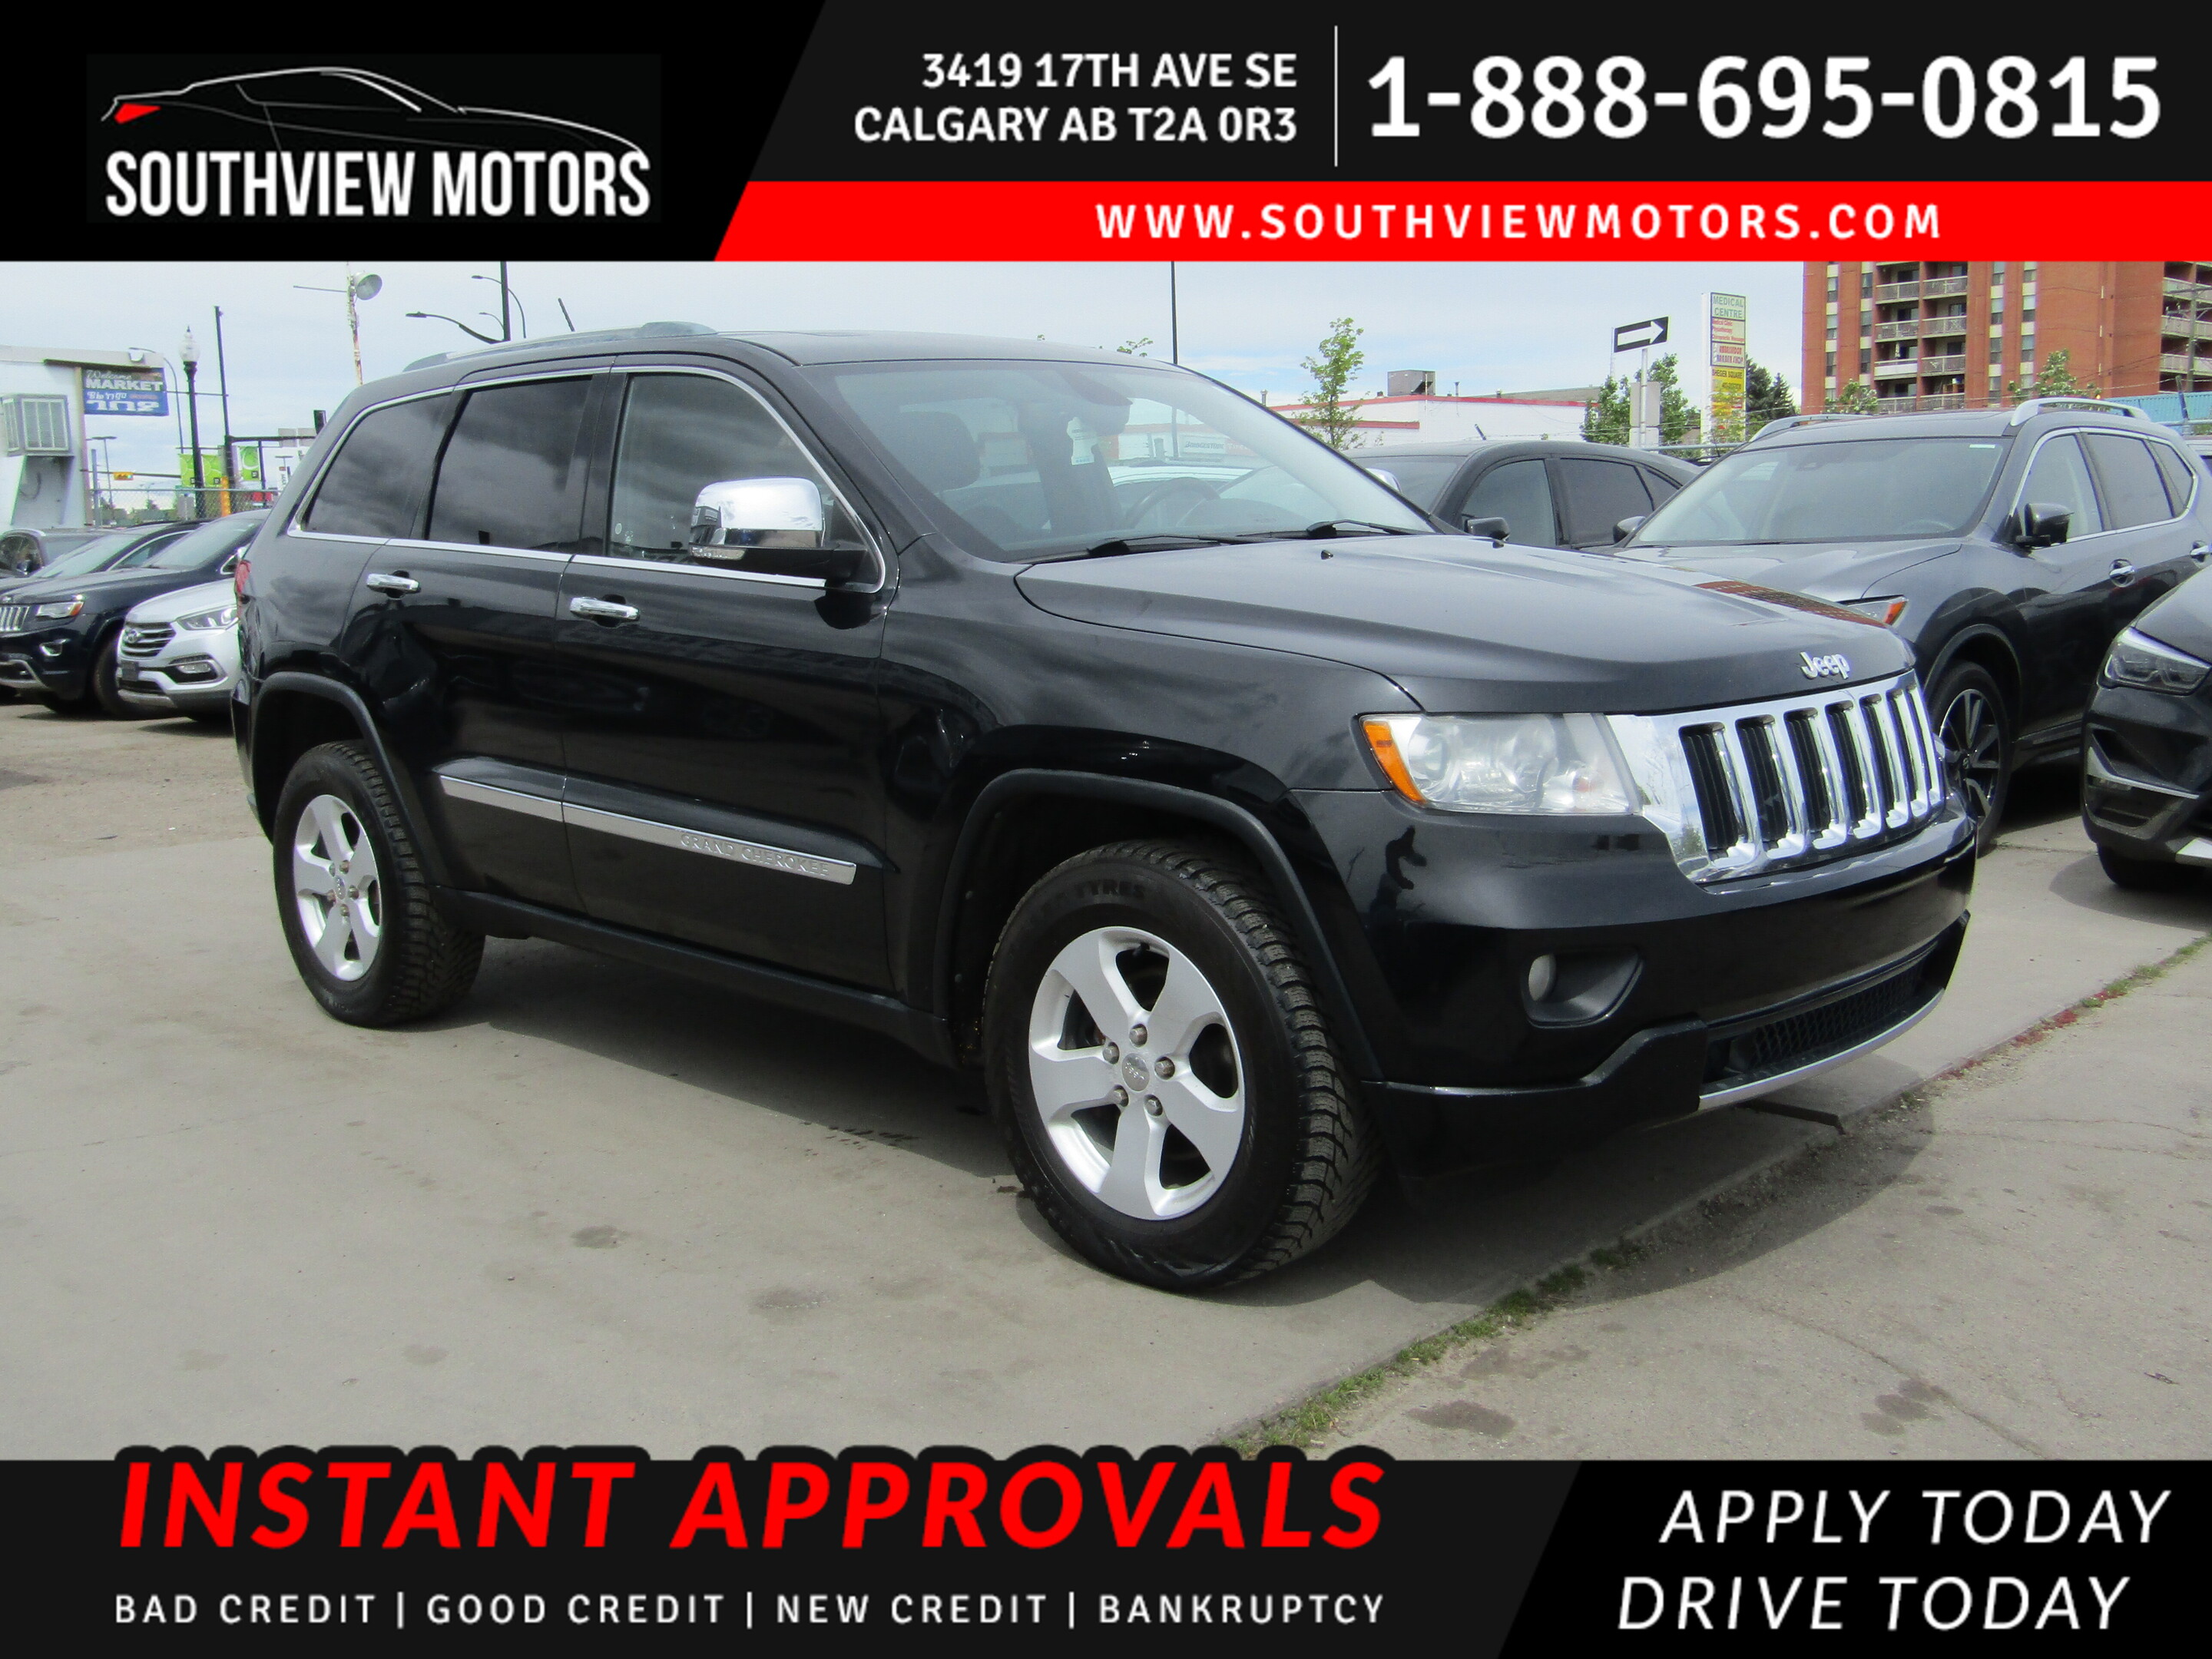 2012 Jeep Grand Cherokee LIMITED 4WD V6 3.6L NAV/B.CAM/ROOF/LEATHER 